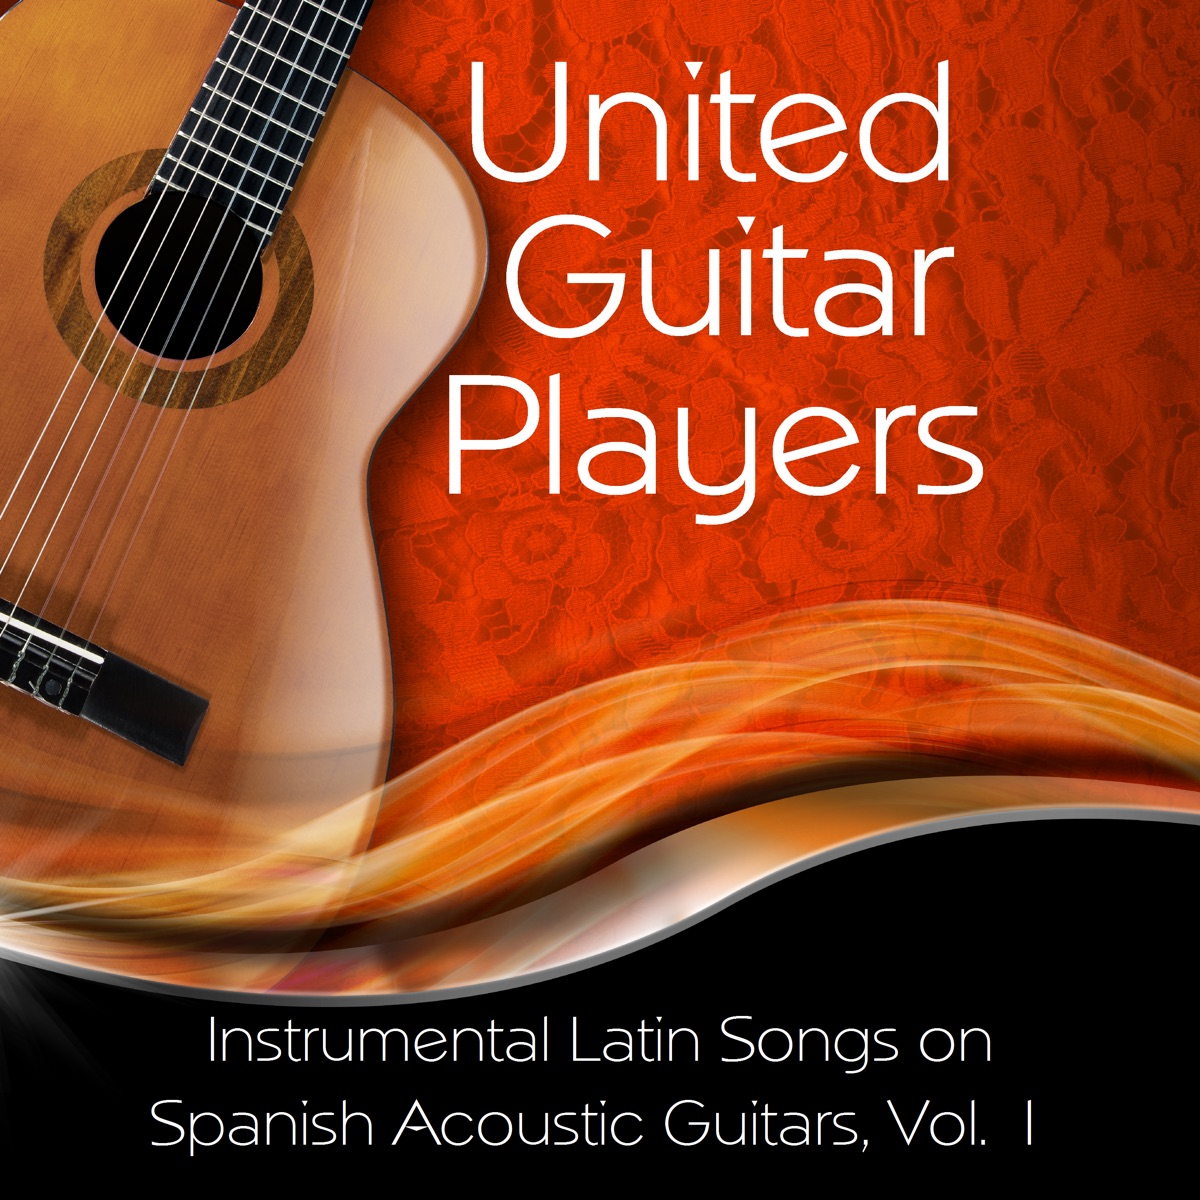 Instrumental Latin Songs on Spanish Acoustic Guitars, Vol. 1 by United  Guitar Players on Apple Music